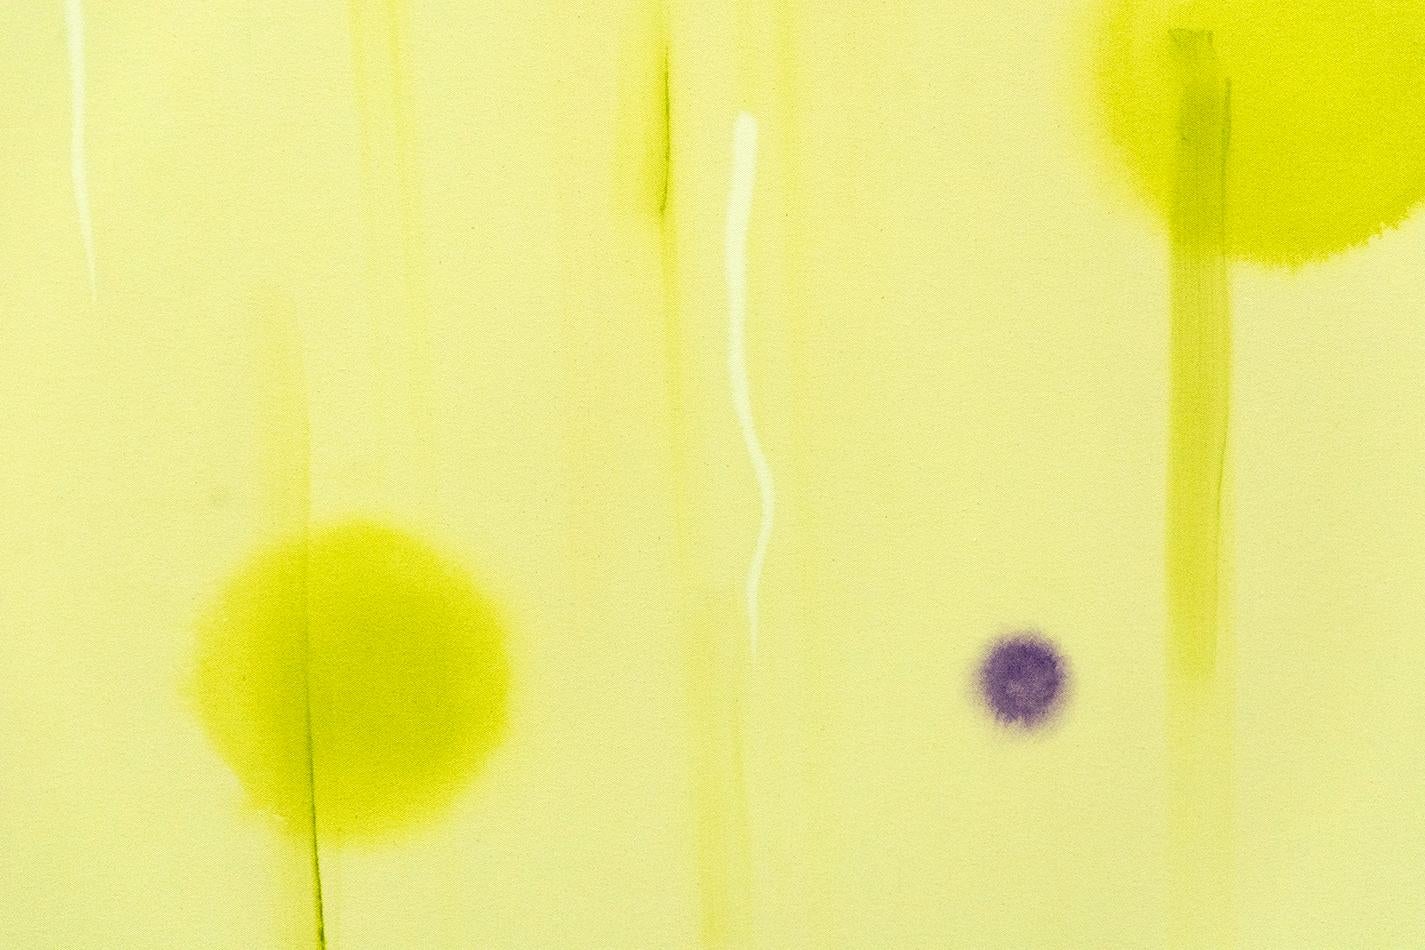 Drops of violet balance the movement of luminous yellow orbs in this elegant chartreuse composition by Milly Ristvedt. 

